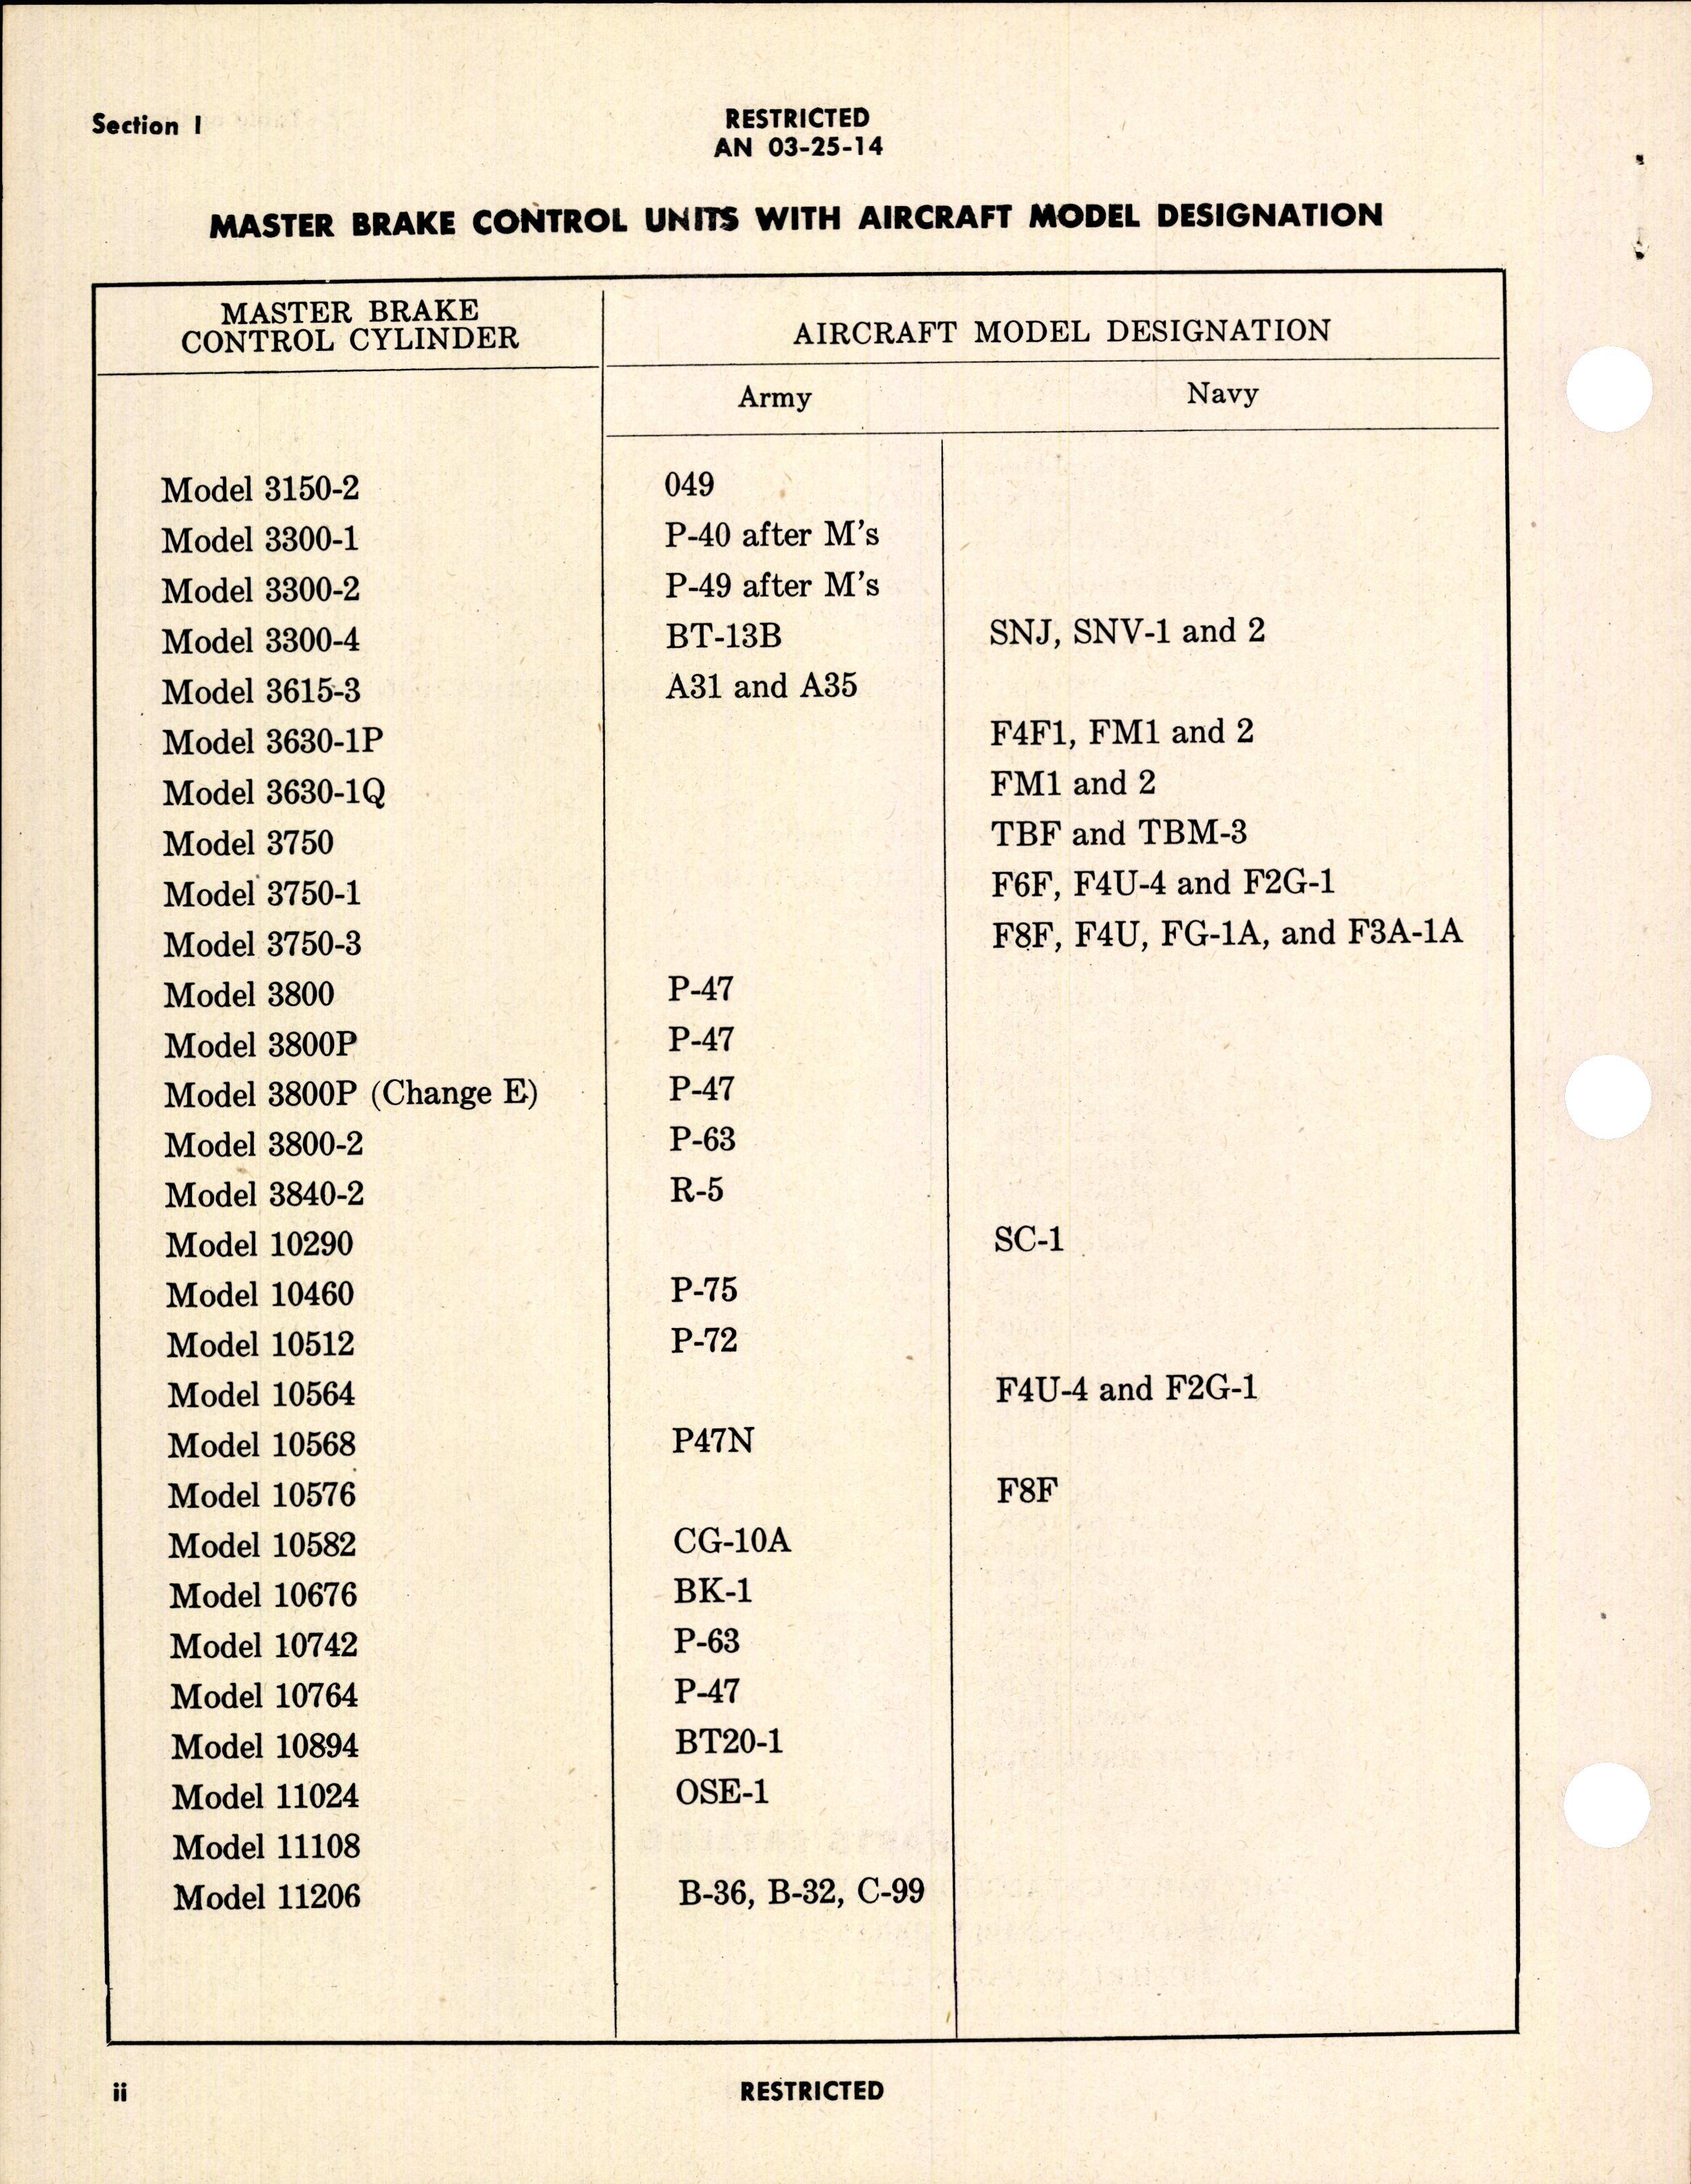 Sample page 4 from AirCorps Library document: Operation, Service, & Overhaul Instructions with Parts Catalog for Master Brake Control Cylinders